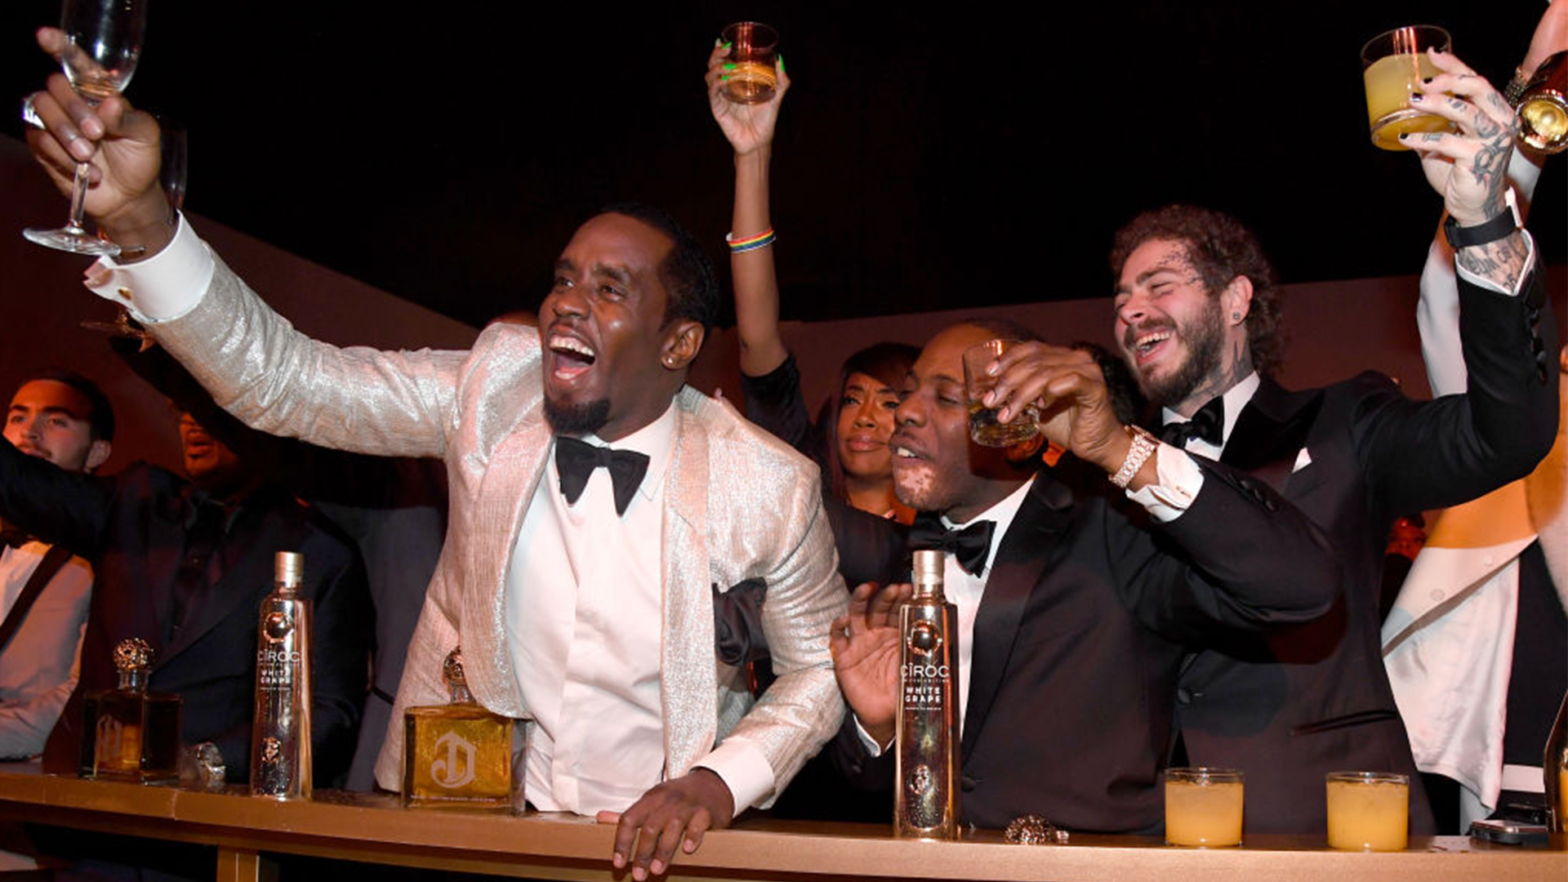 To Celebrate #CincoDeLeón, Diddy Partied In Three Different Cities In One Night